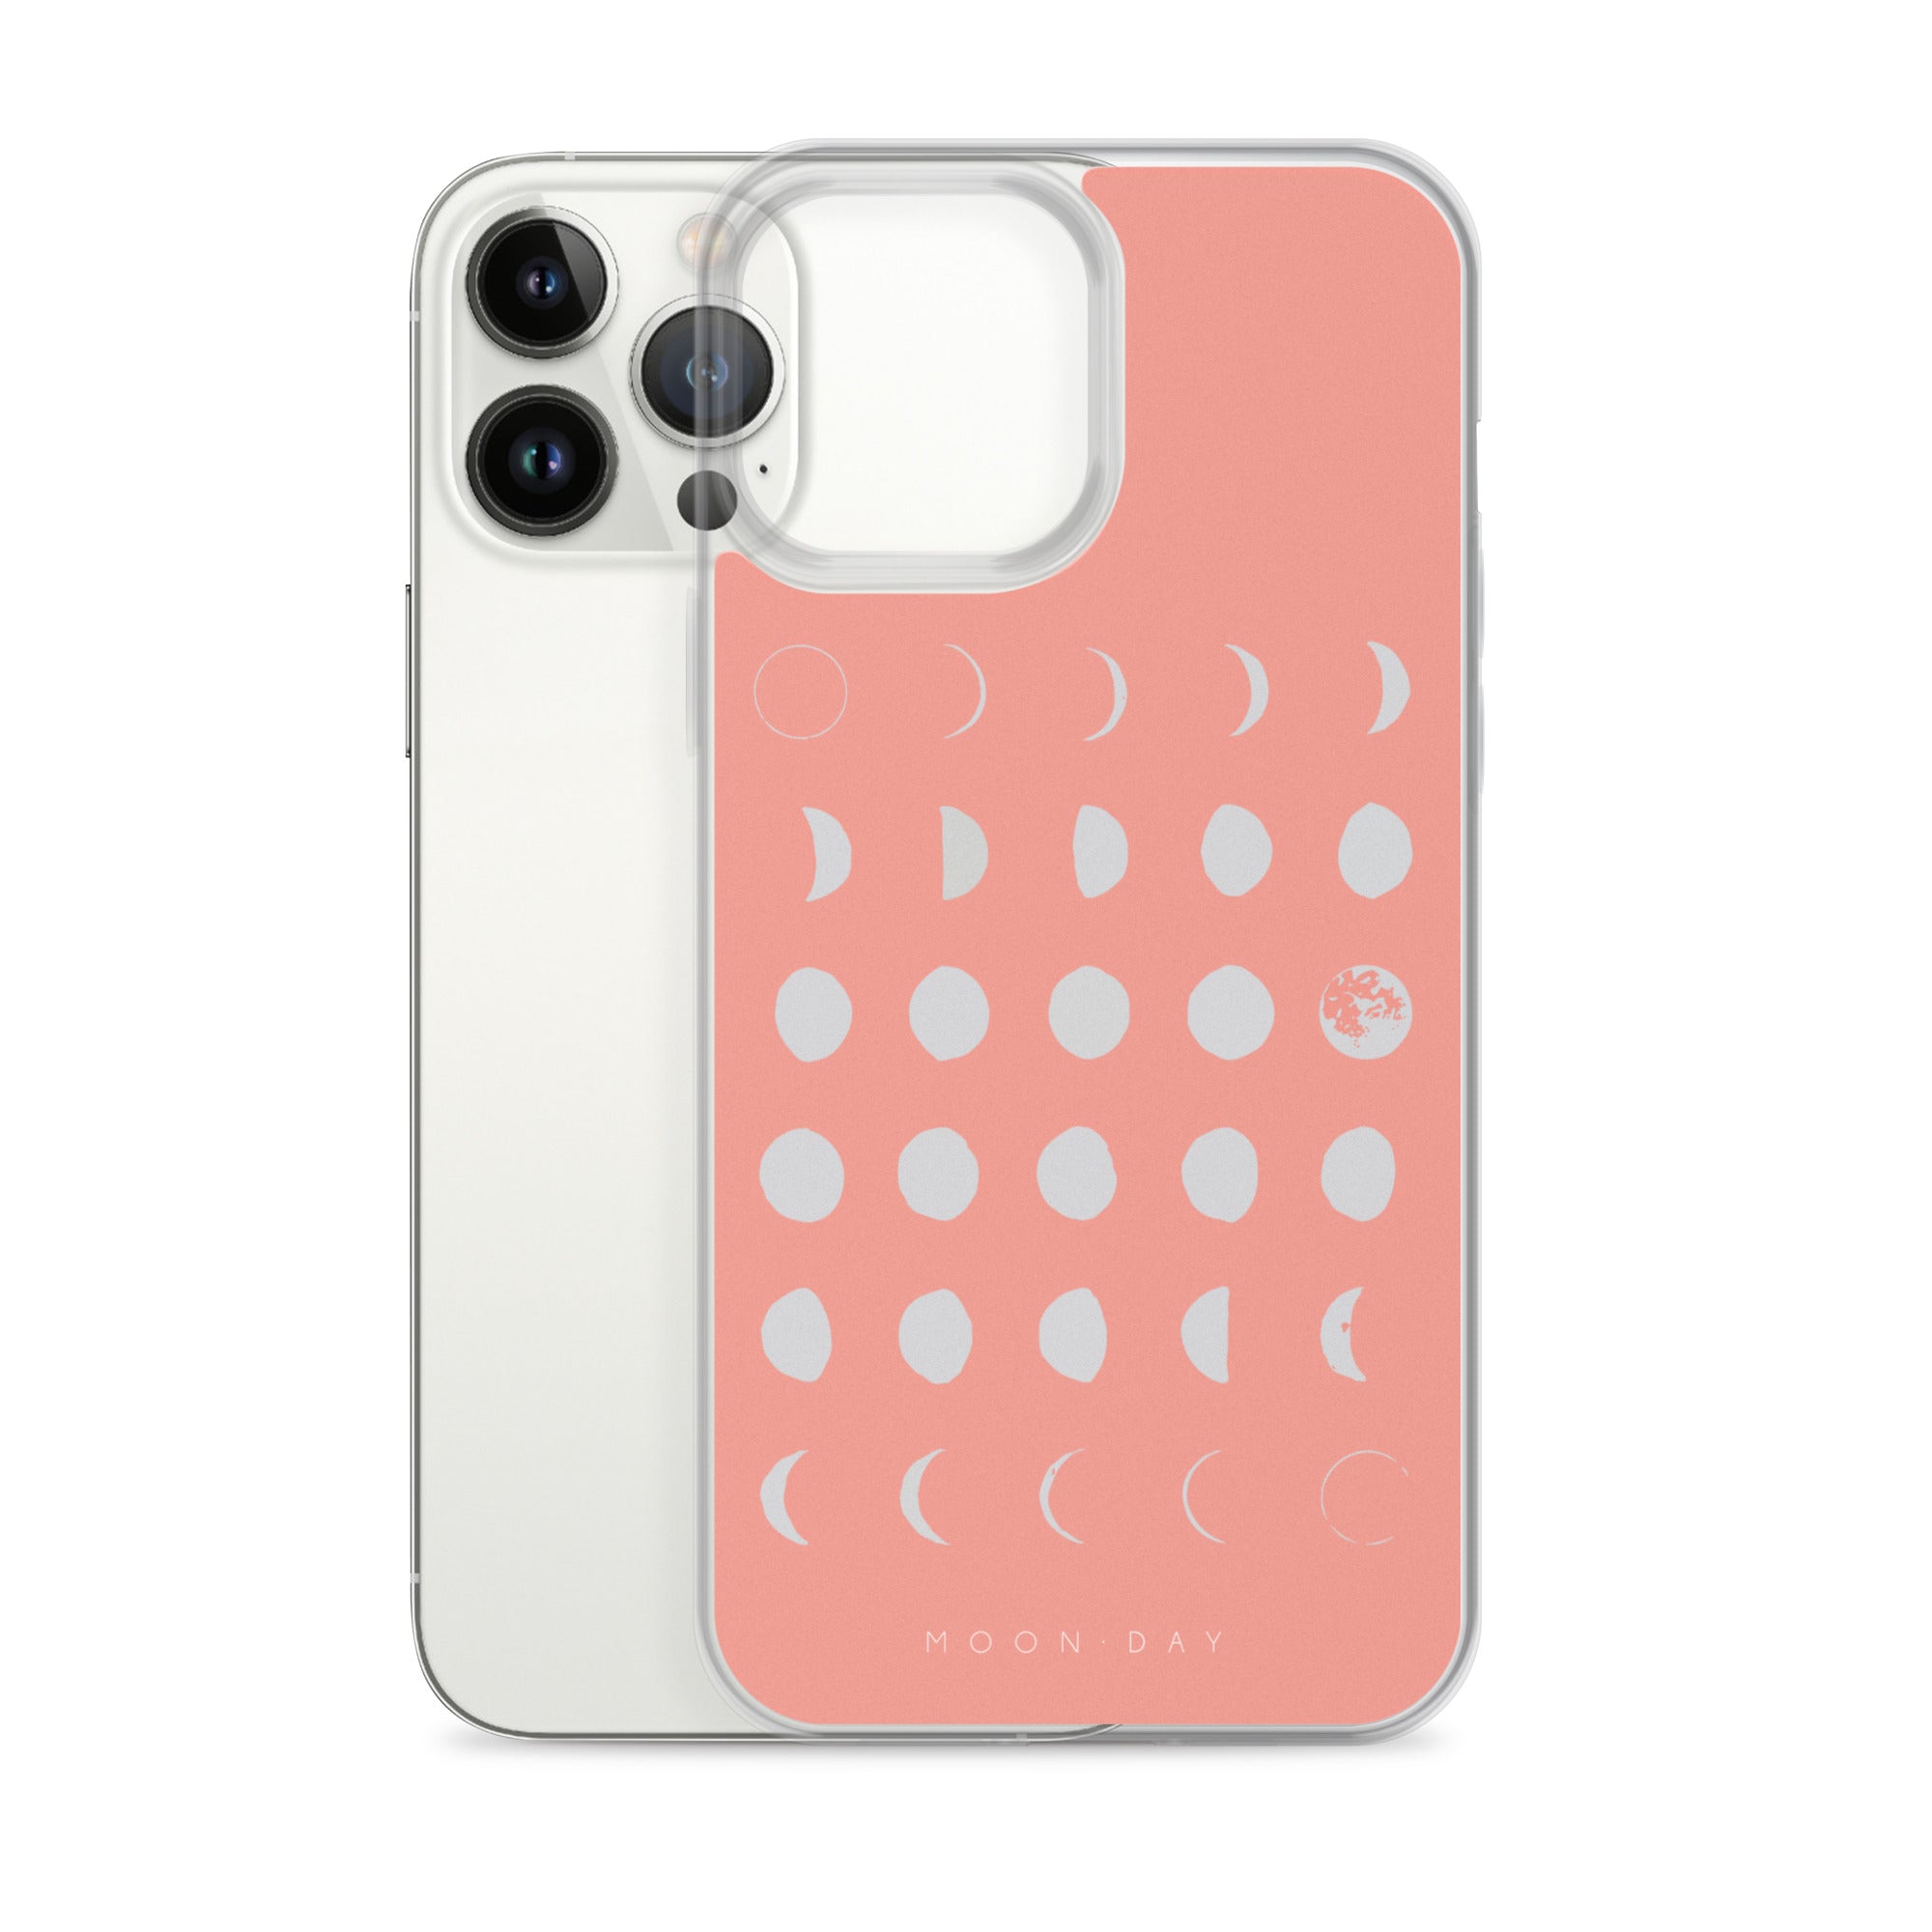 Moon • Day iPhone case